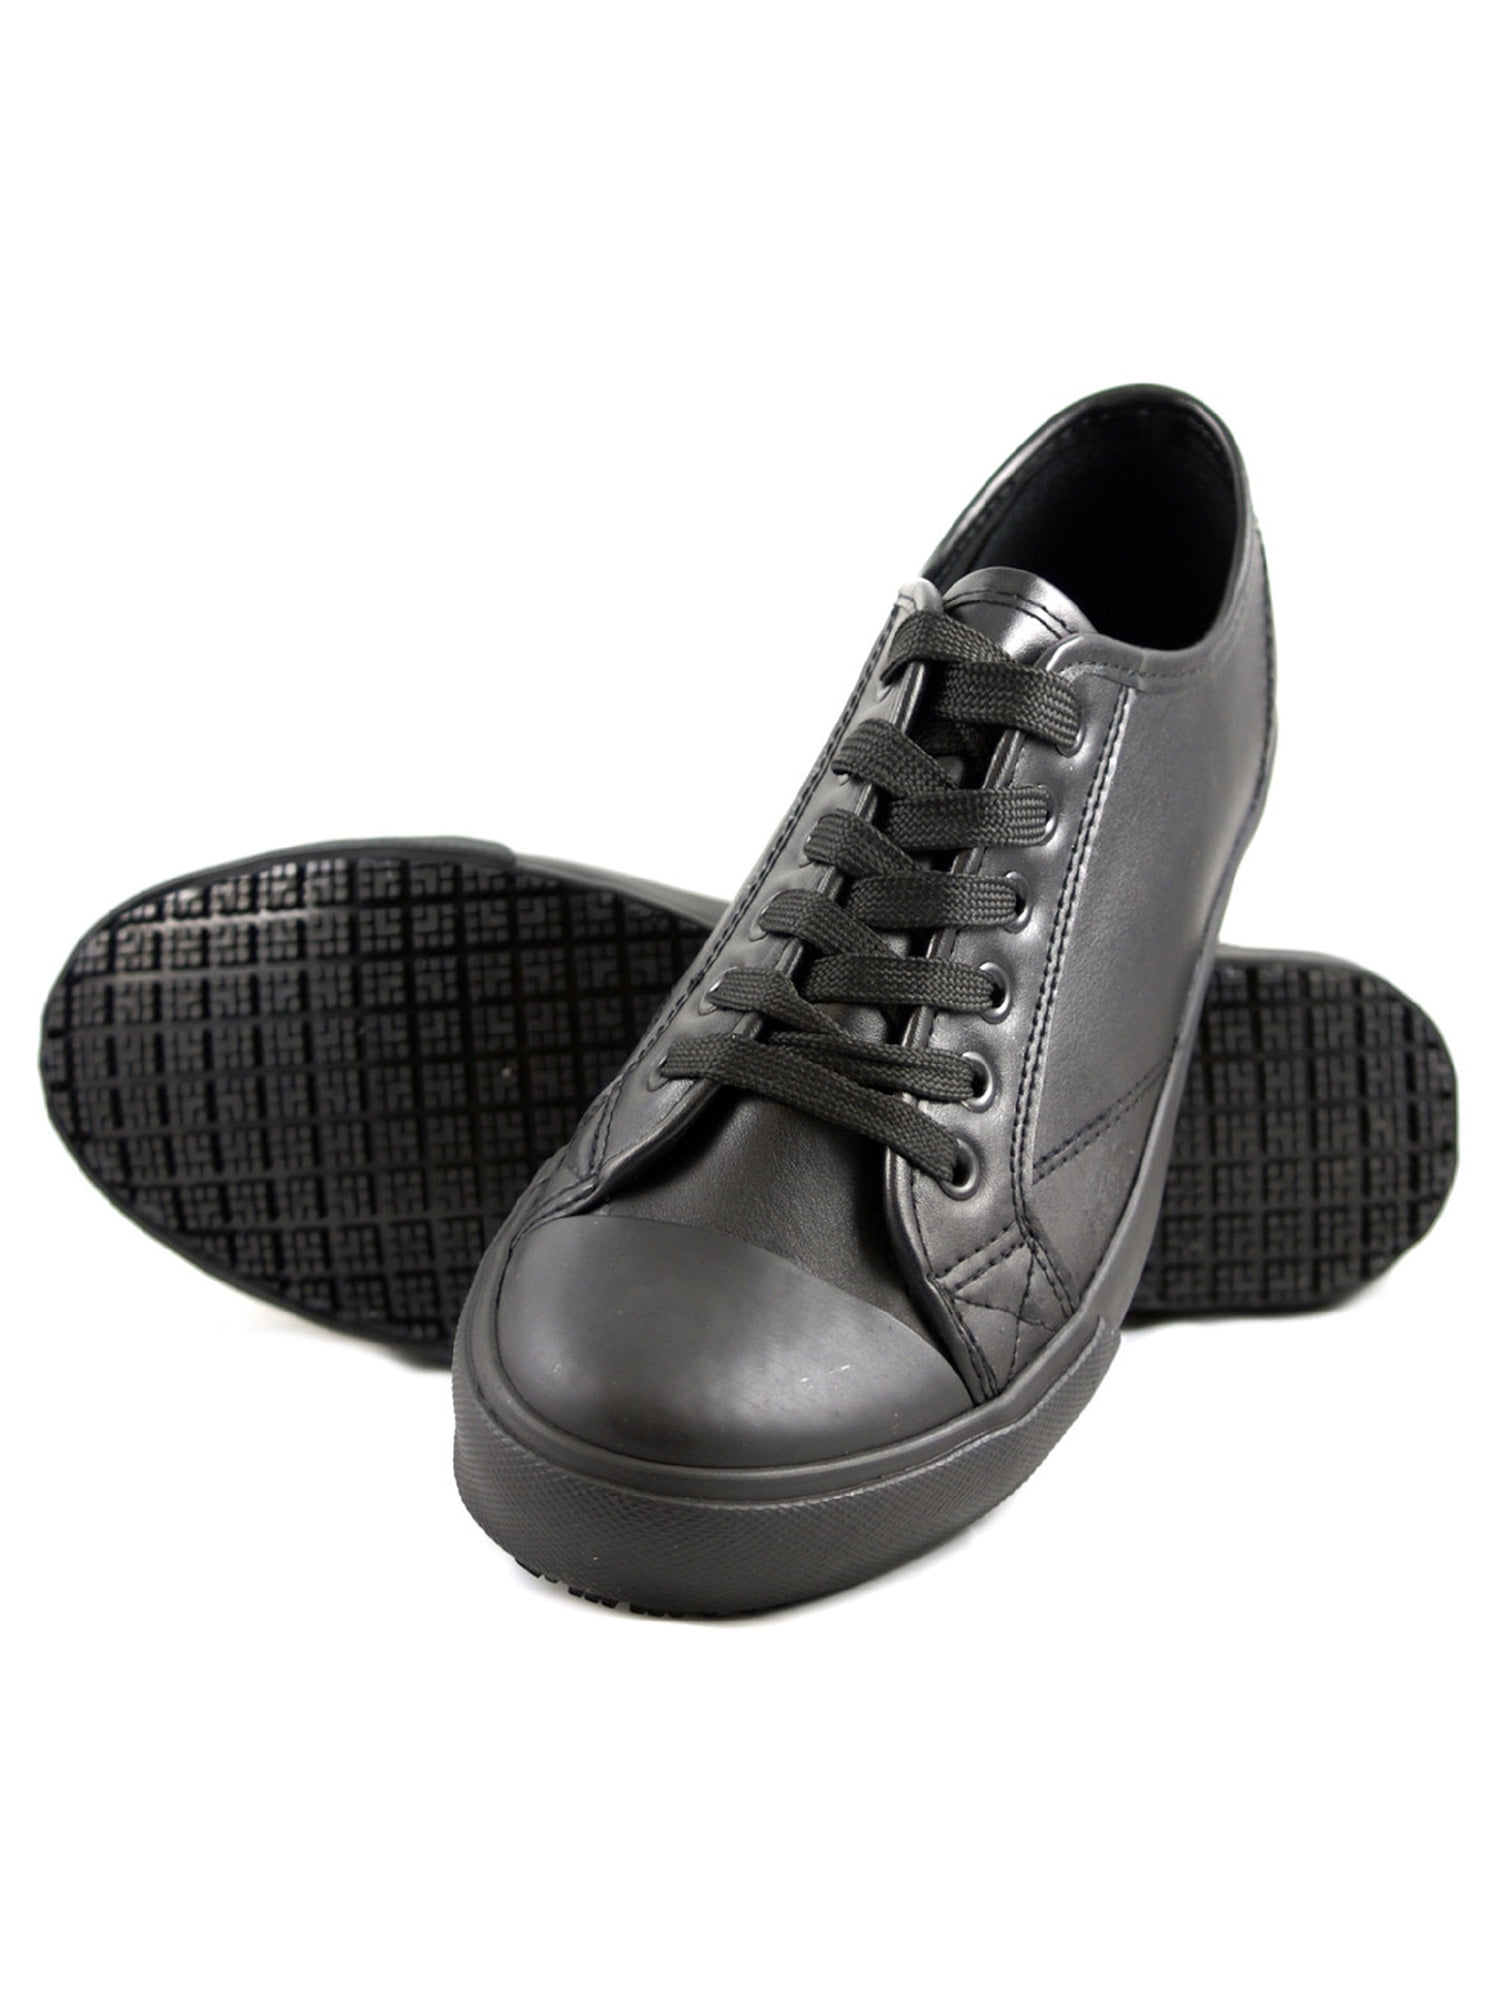 Shoe - Womens Slip Resistant Leather 